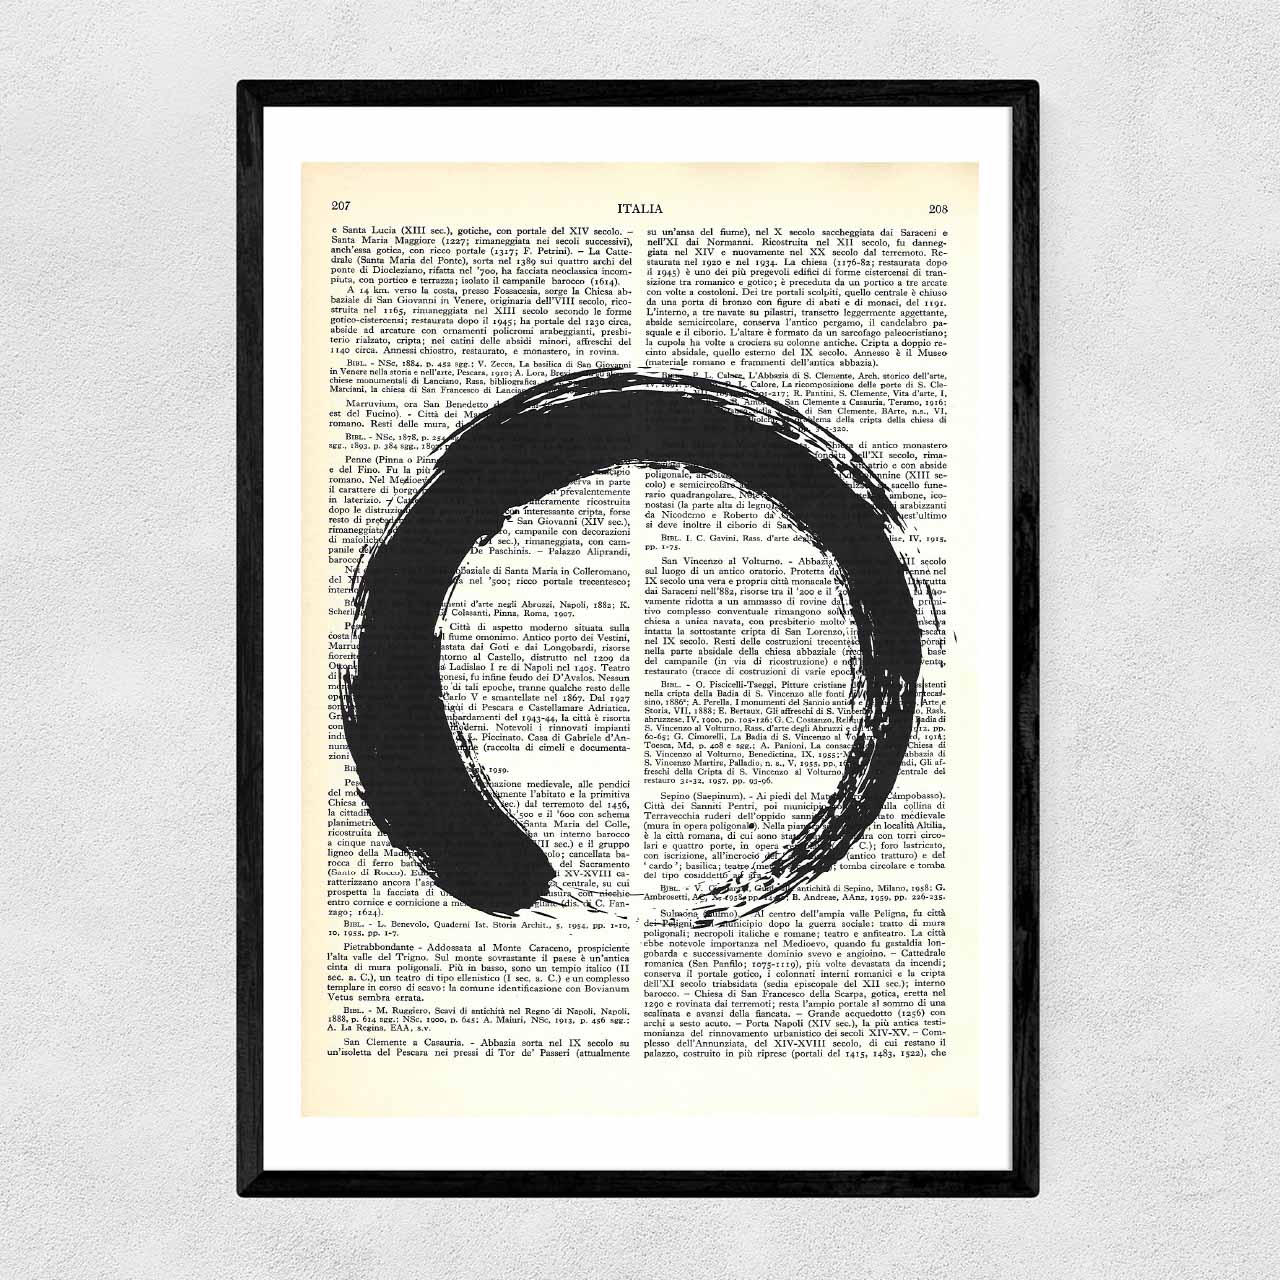 Mix-up: Enso and Zen - Enlightening in a circle